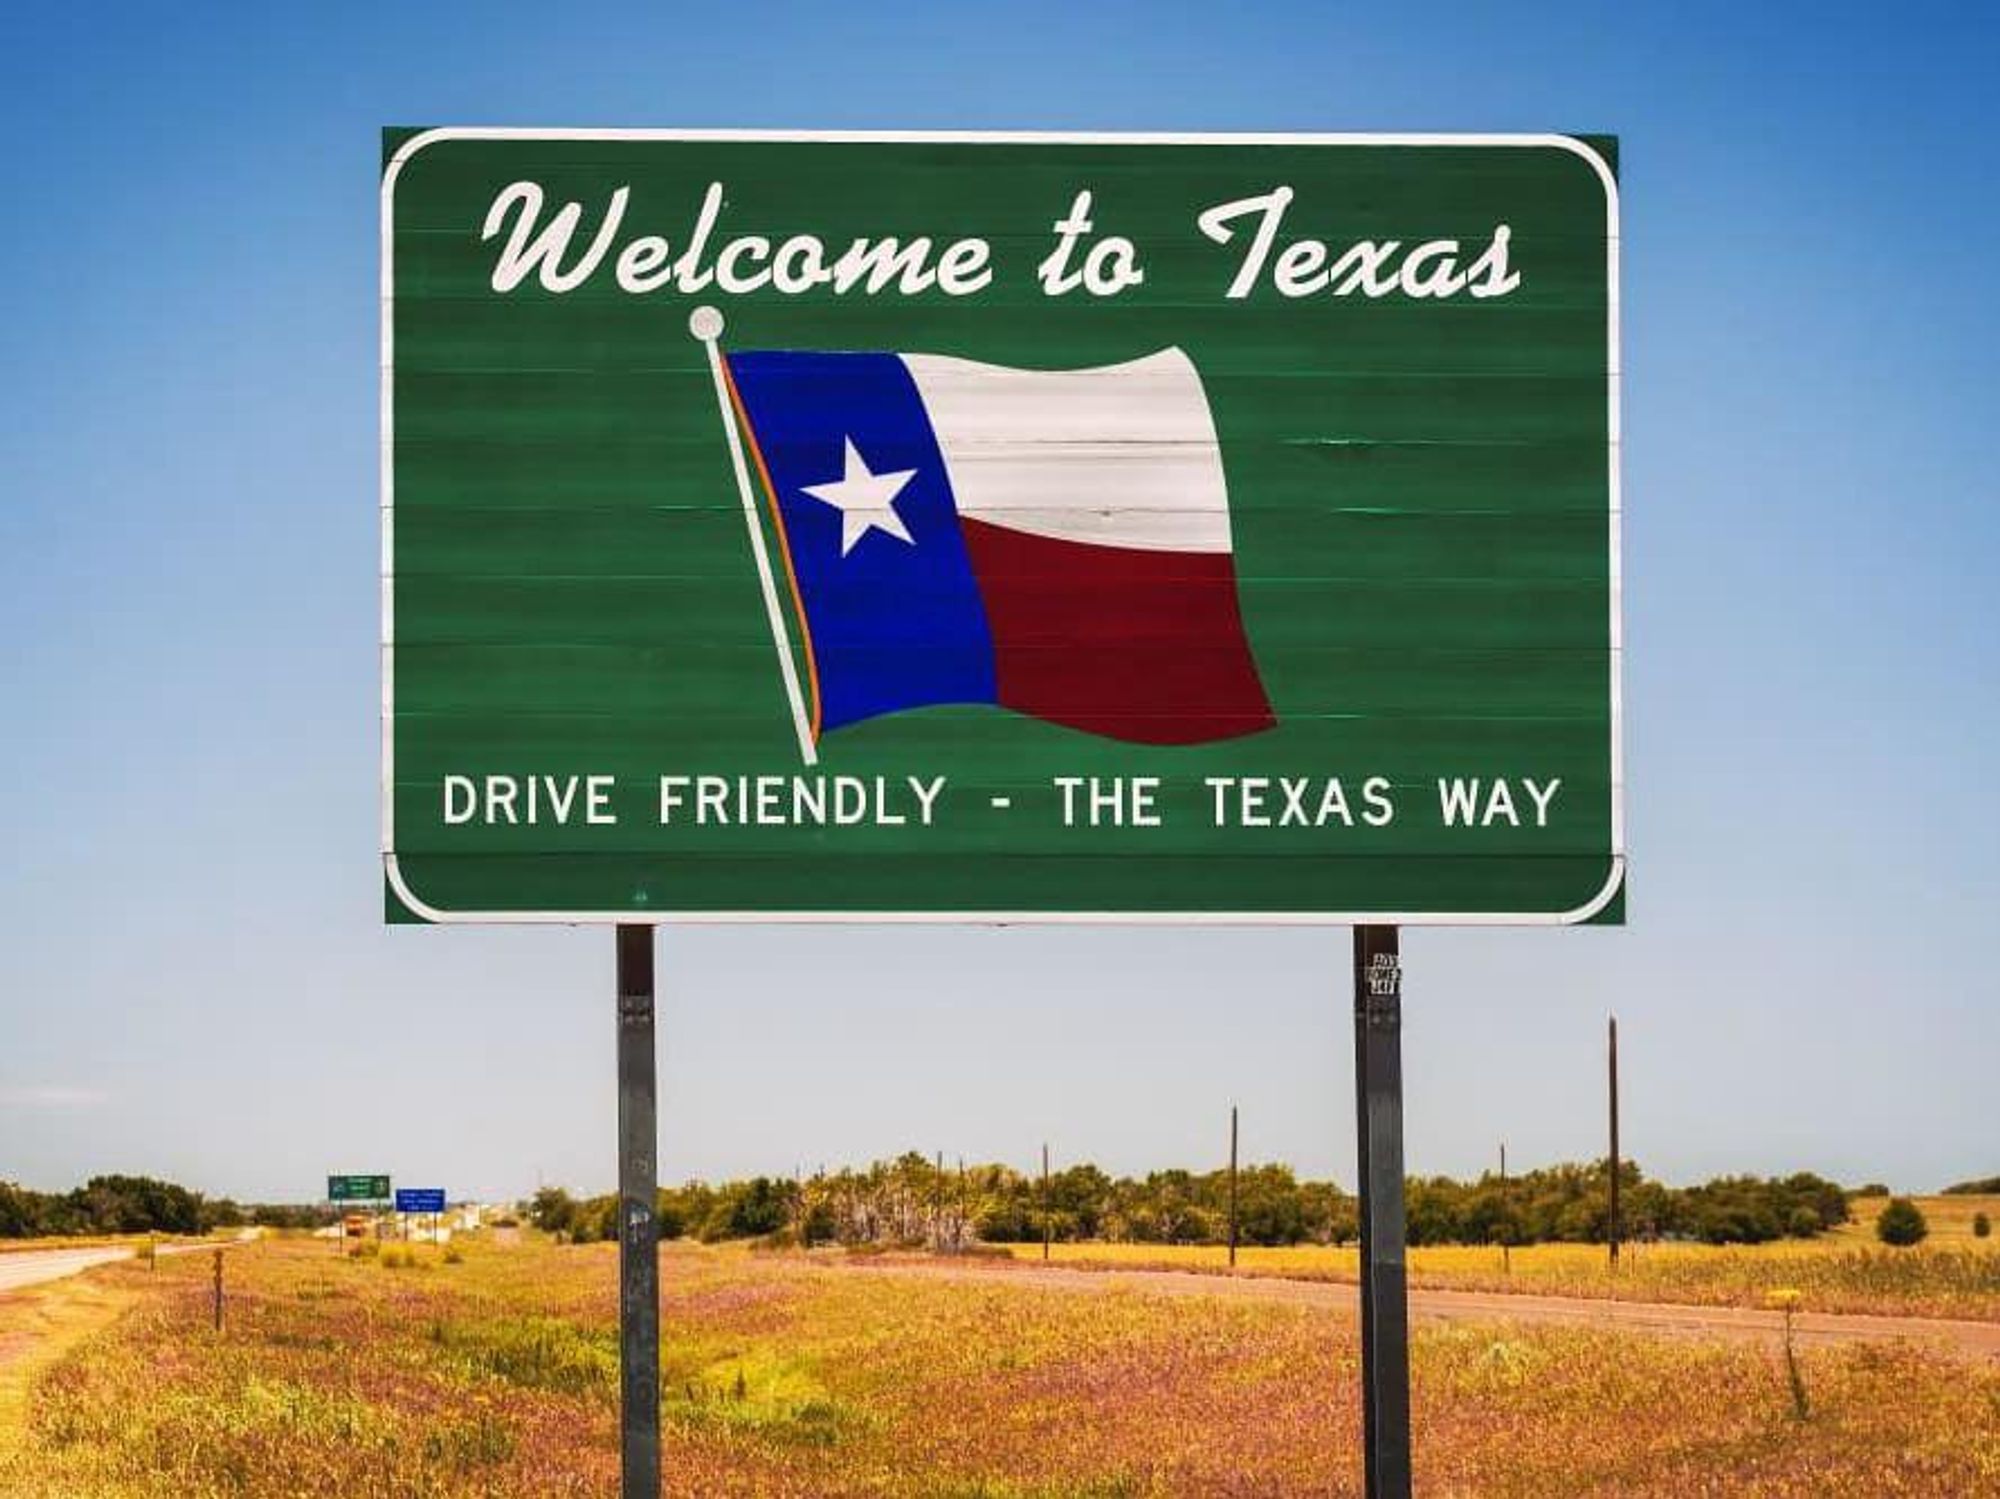 Personal, Business, Agriculture & Mortgages in Texas